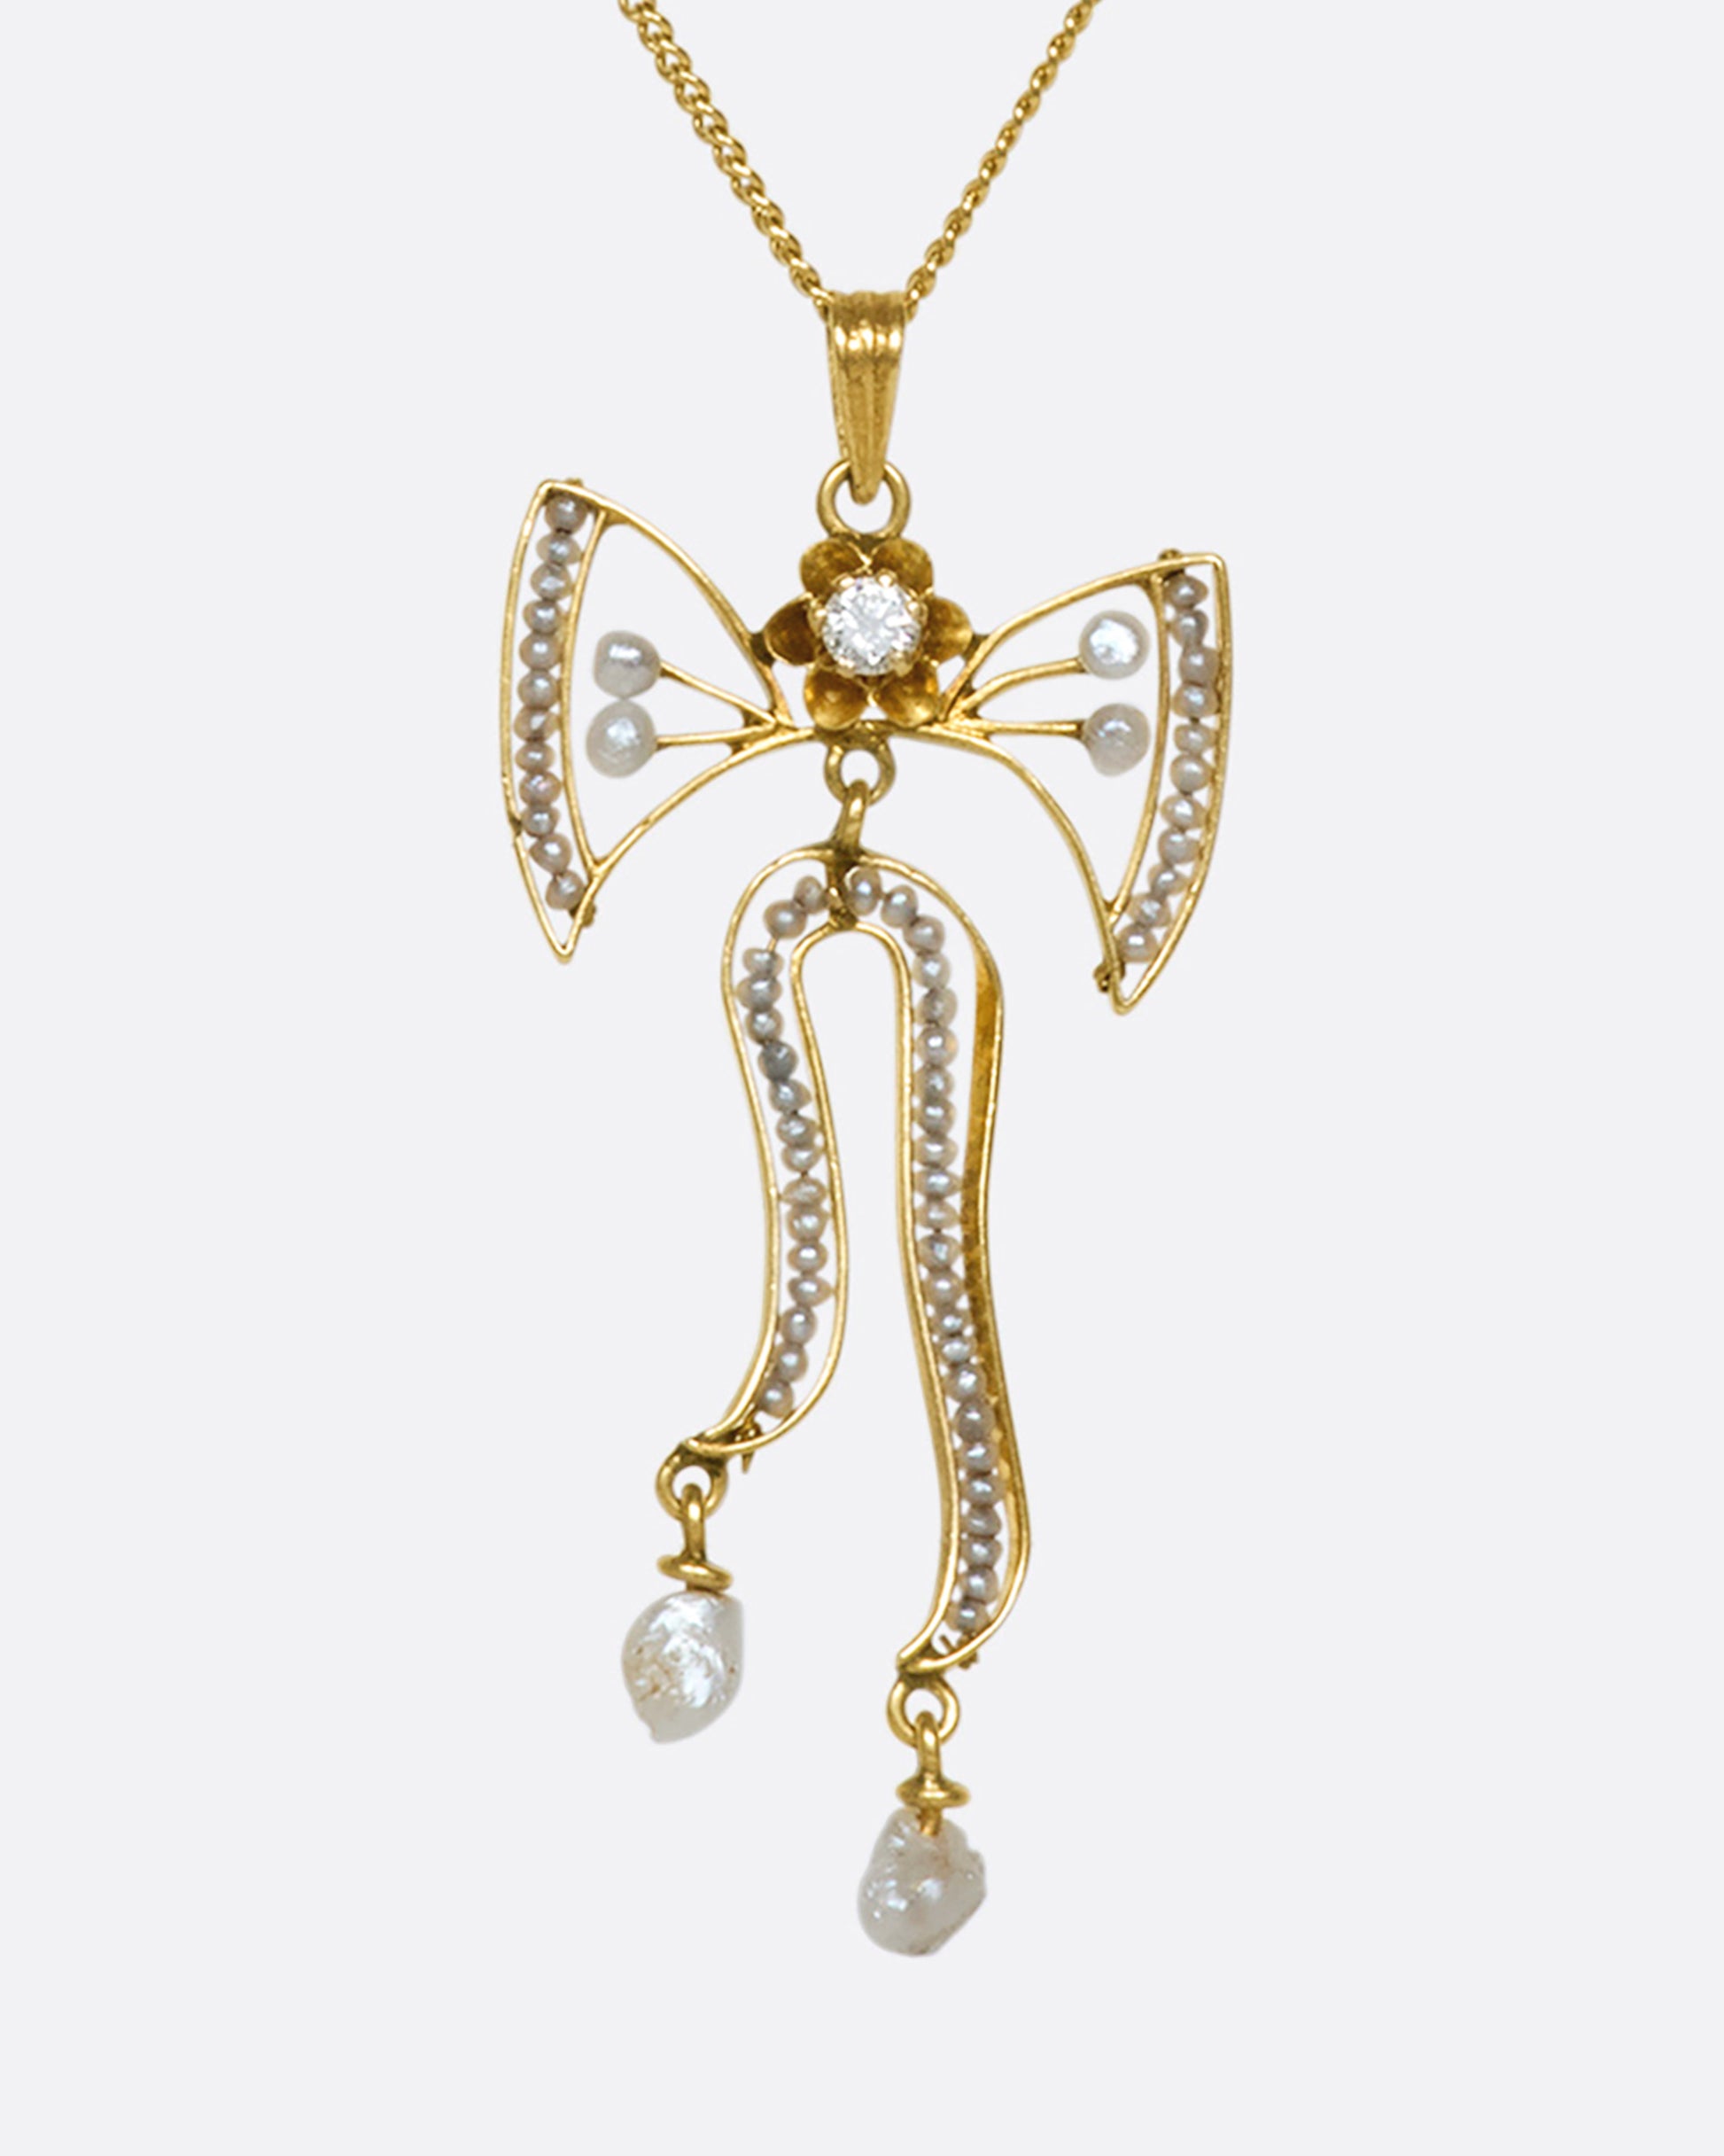 A precious 14k gold bow pendant with diamonds and seed pearls on a 10k gold chain.